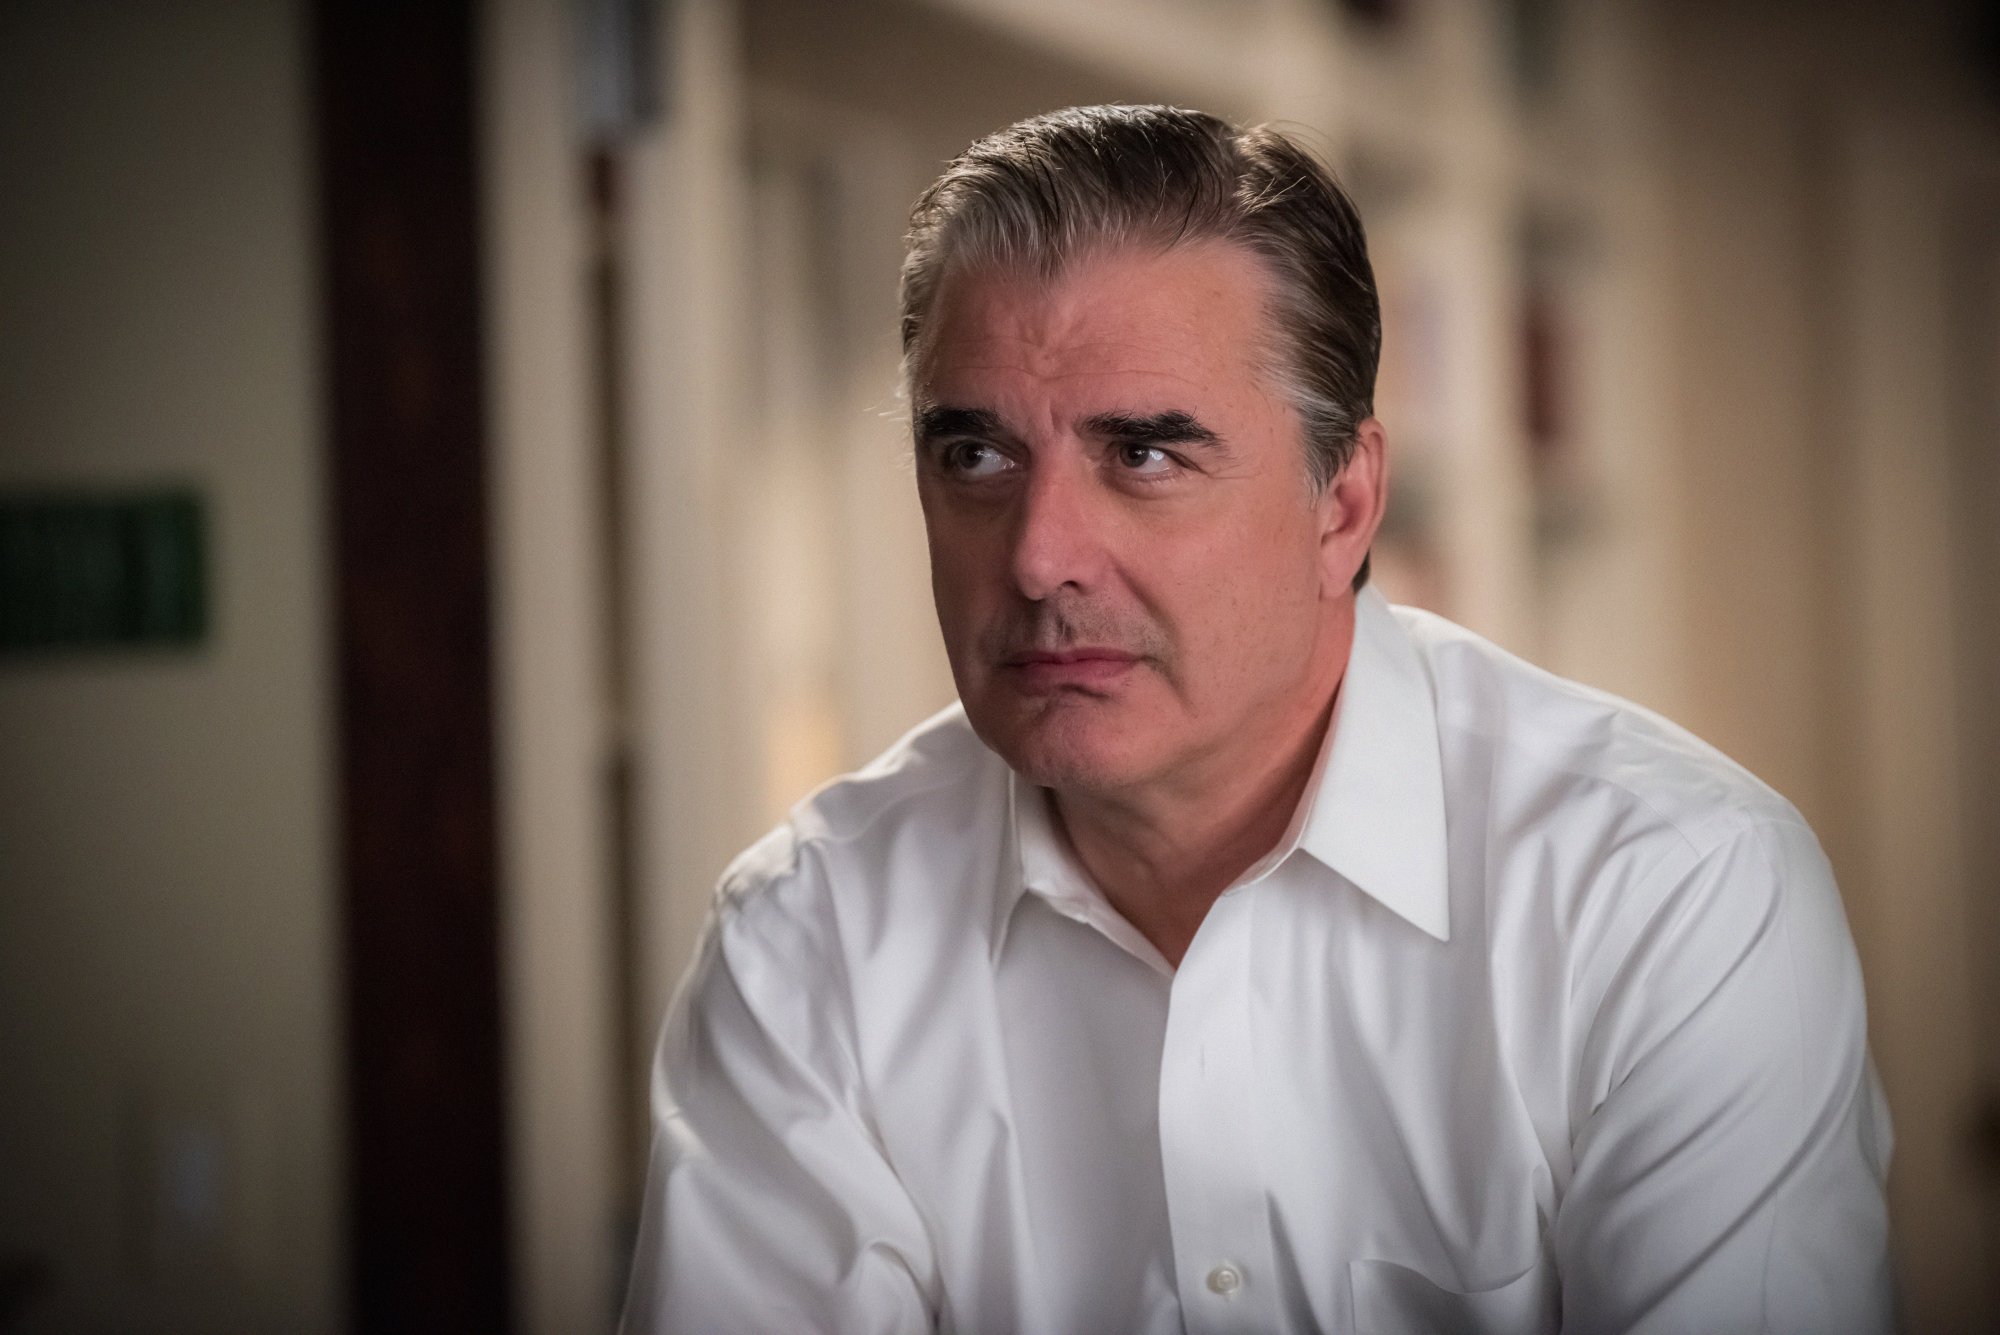 Chris noth in a scene from 'The Good Wife'